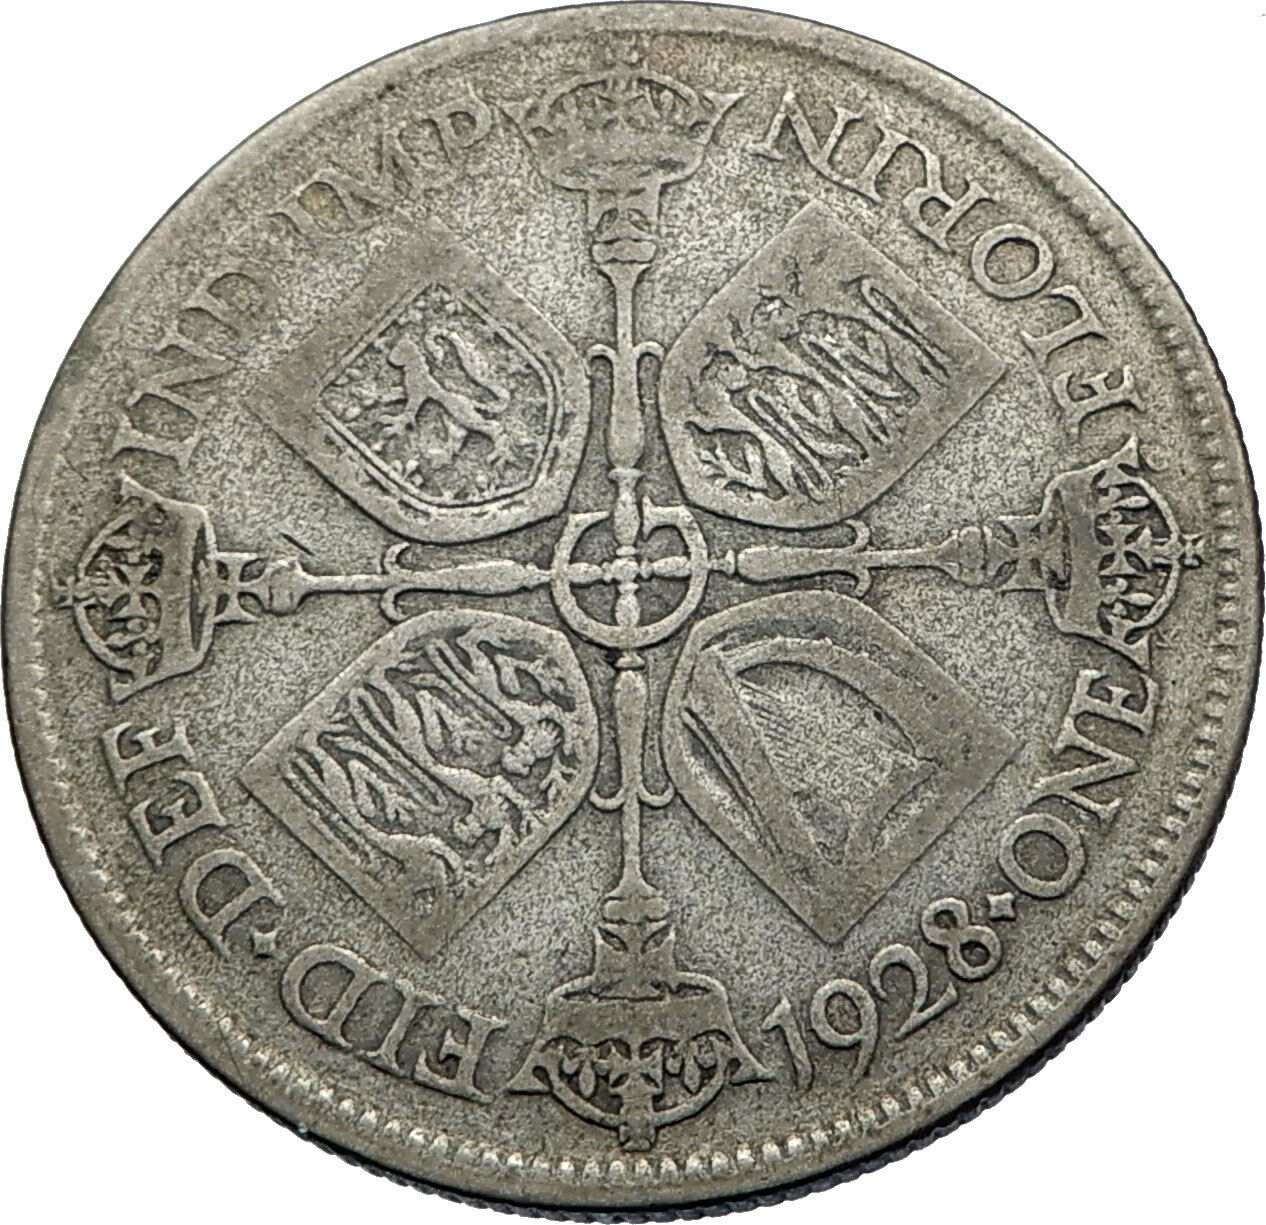 1928 United Kingdom Great Britain GEORGE V Silver Florin 2 Shillings Coin i71949